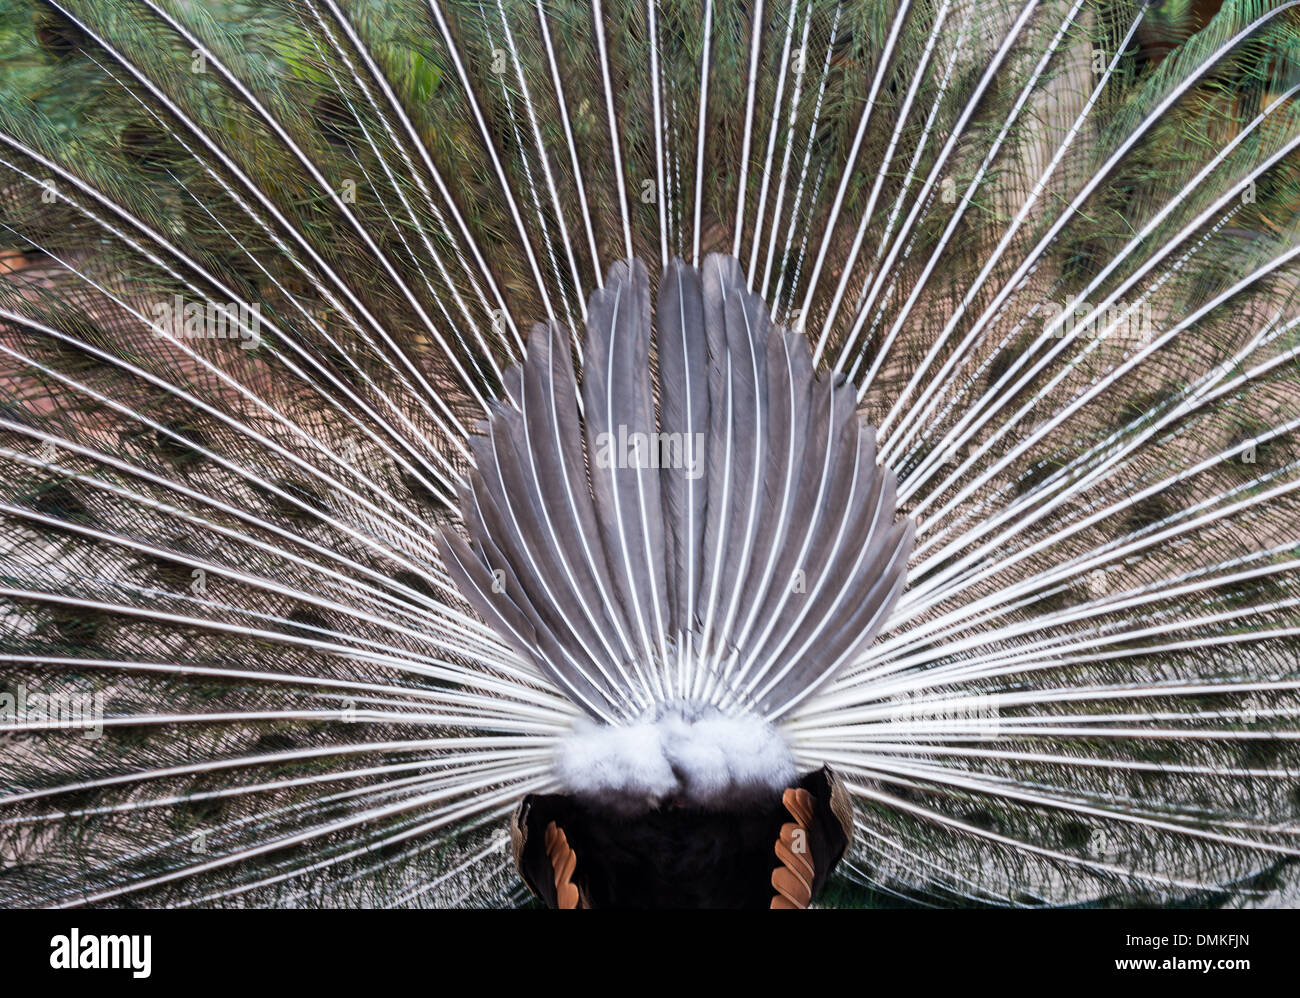 rear feathers of a peacock lyrebird back view in series Stock Photo